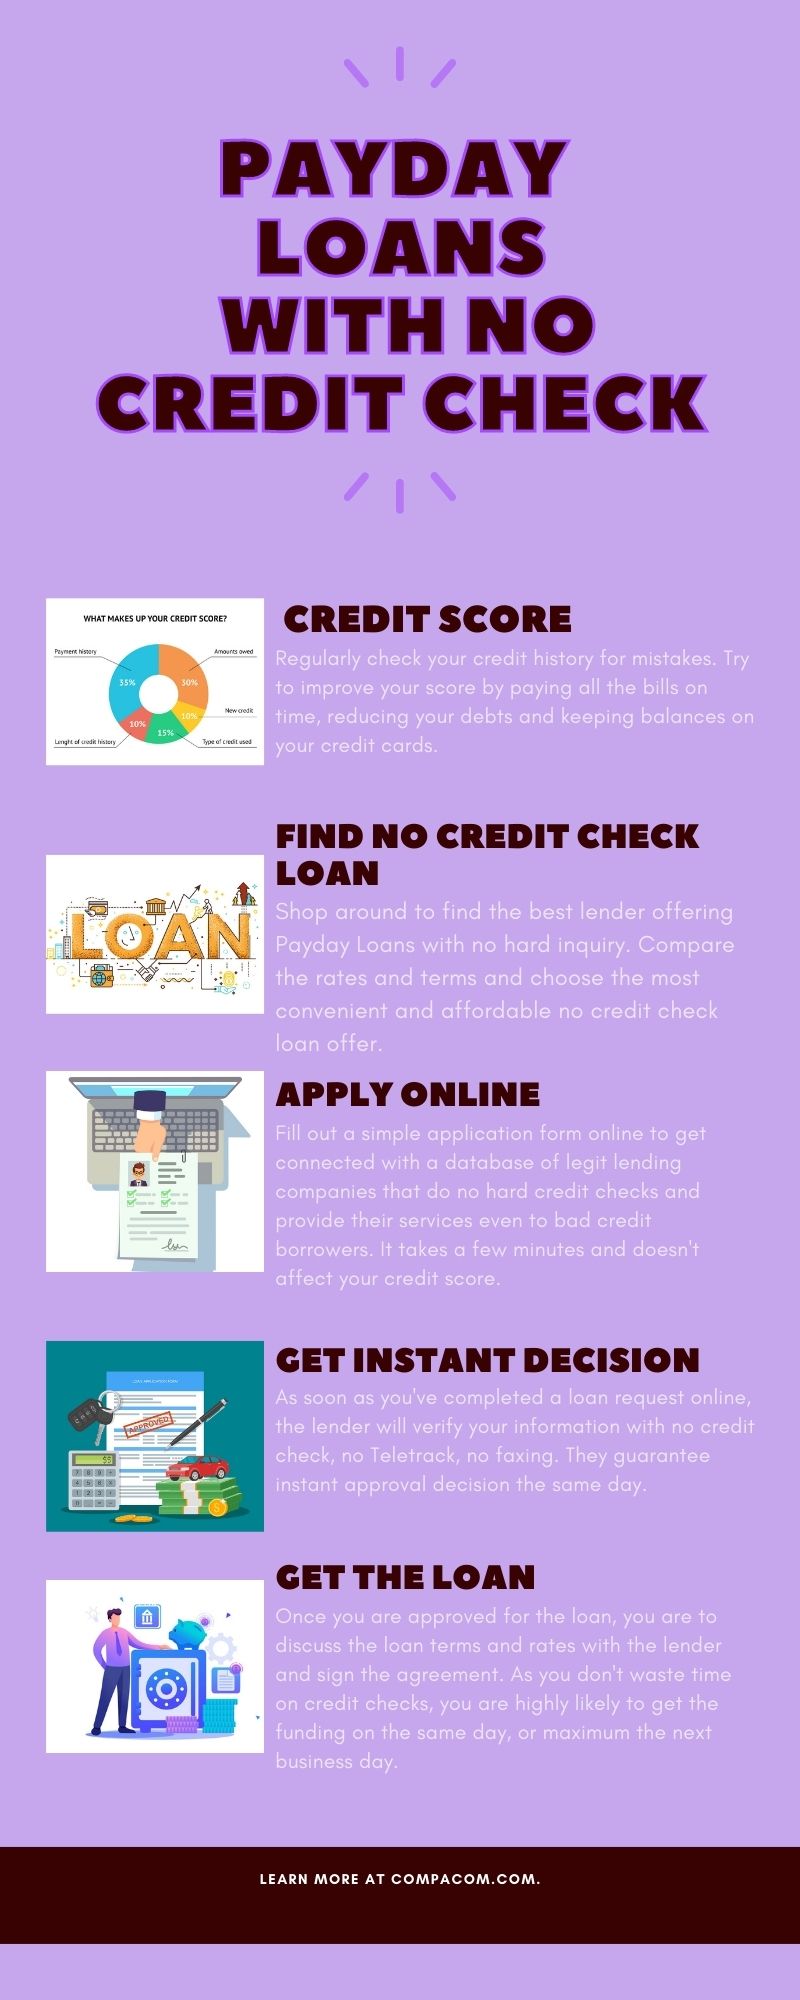 Online Payday Loans with No Credit Check and Instant Approval - Apply